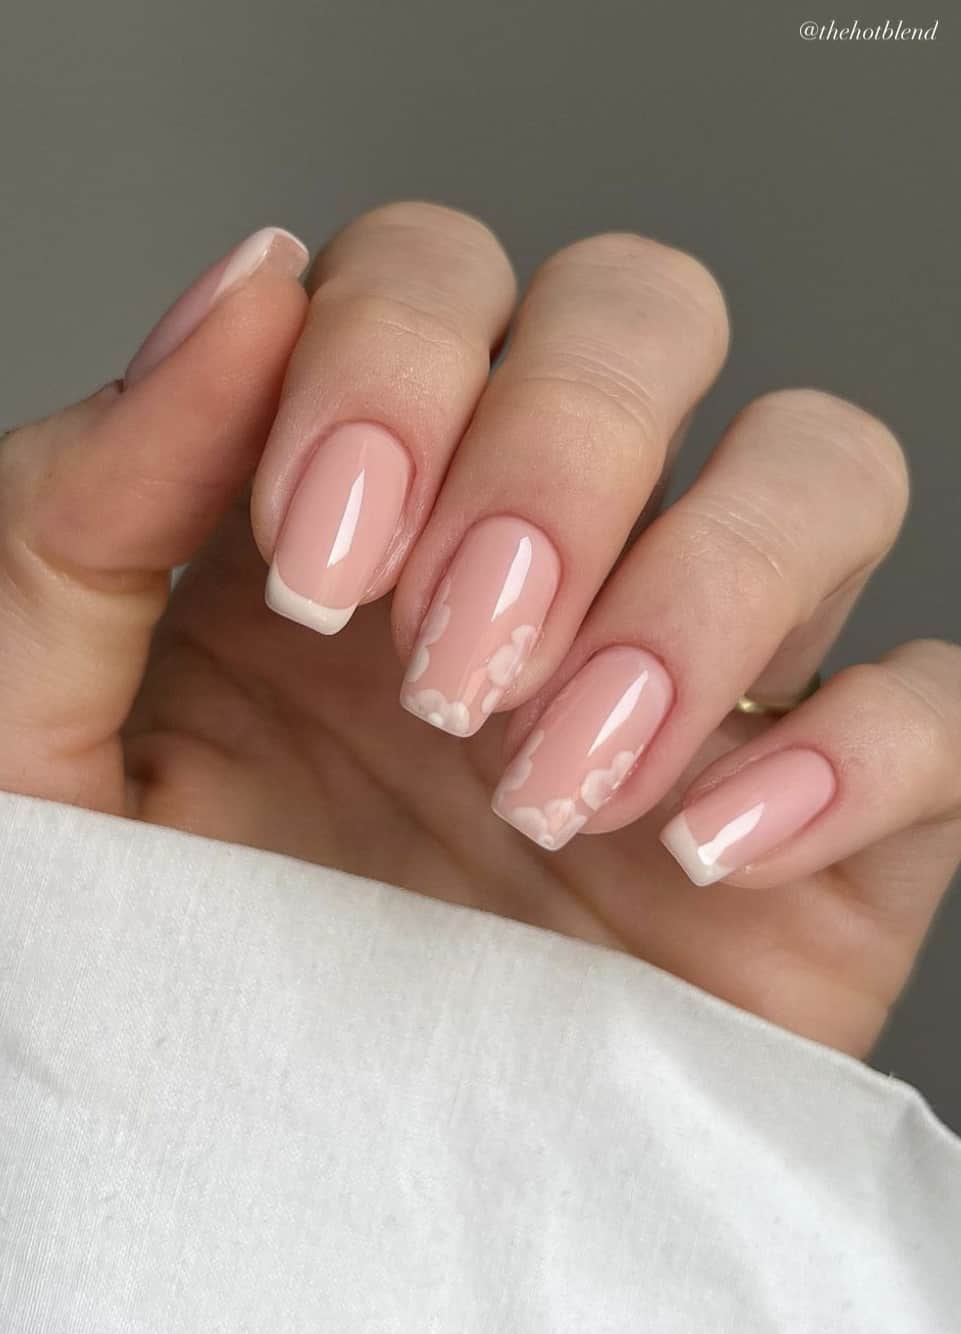 A hand with short square nails with a pink nude base, white French tips, and two accent nails painted with white flowers